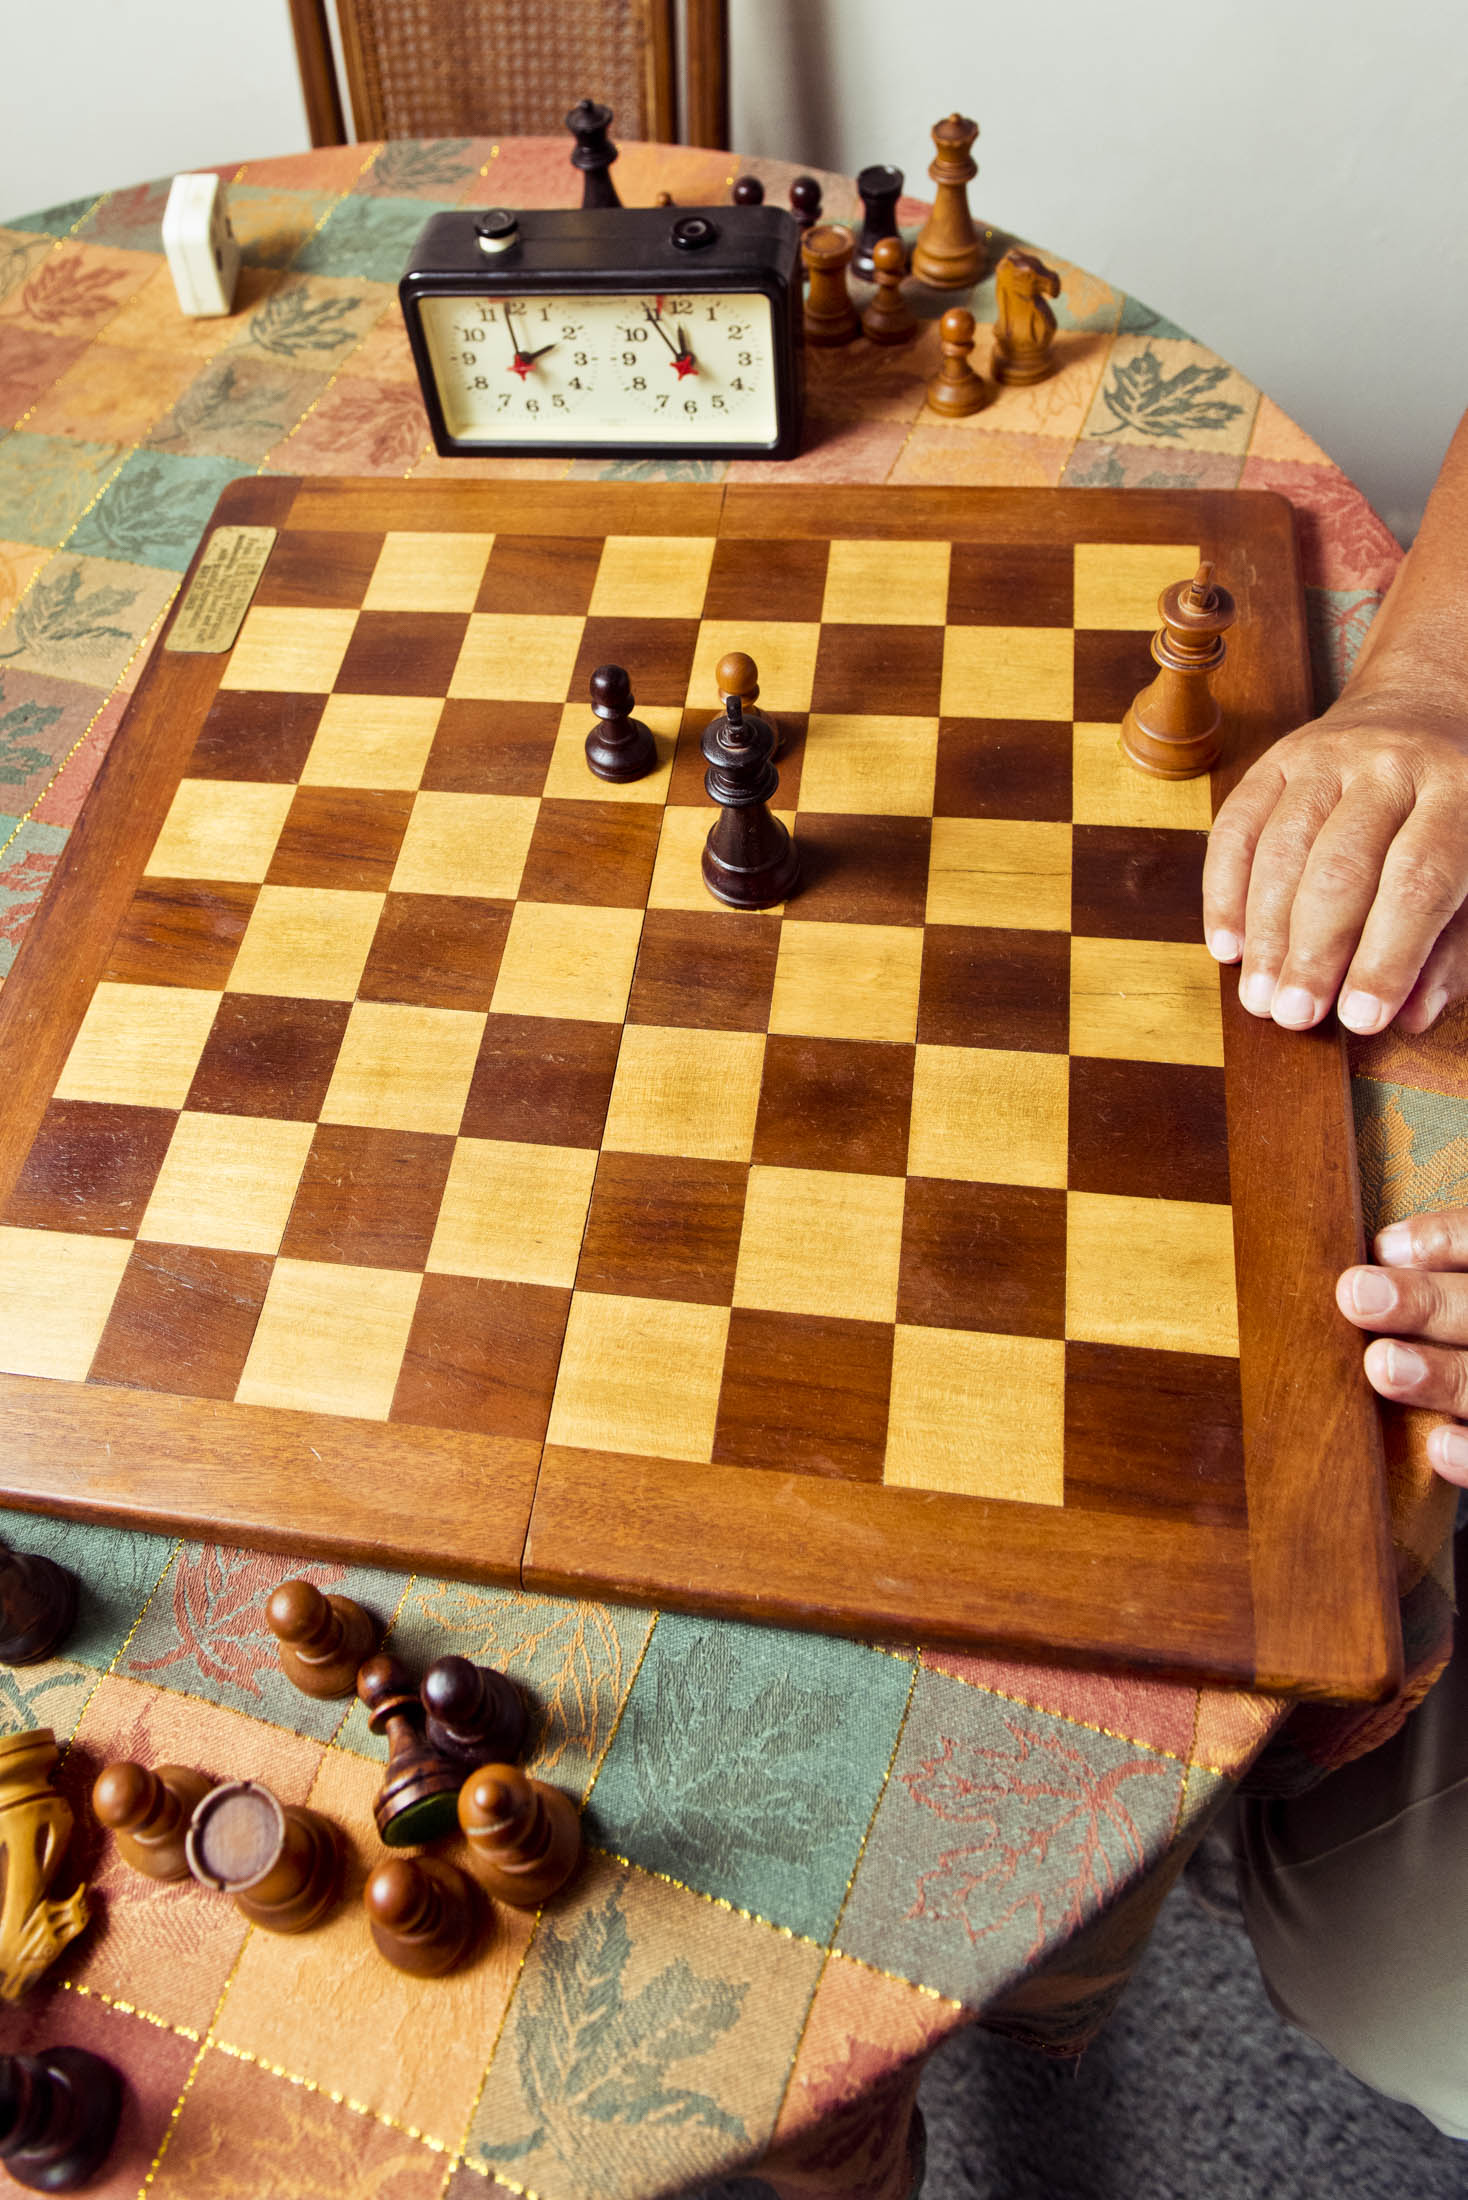 How Bitcoin Is Like The Game Of Chess, by William Boone